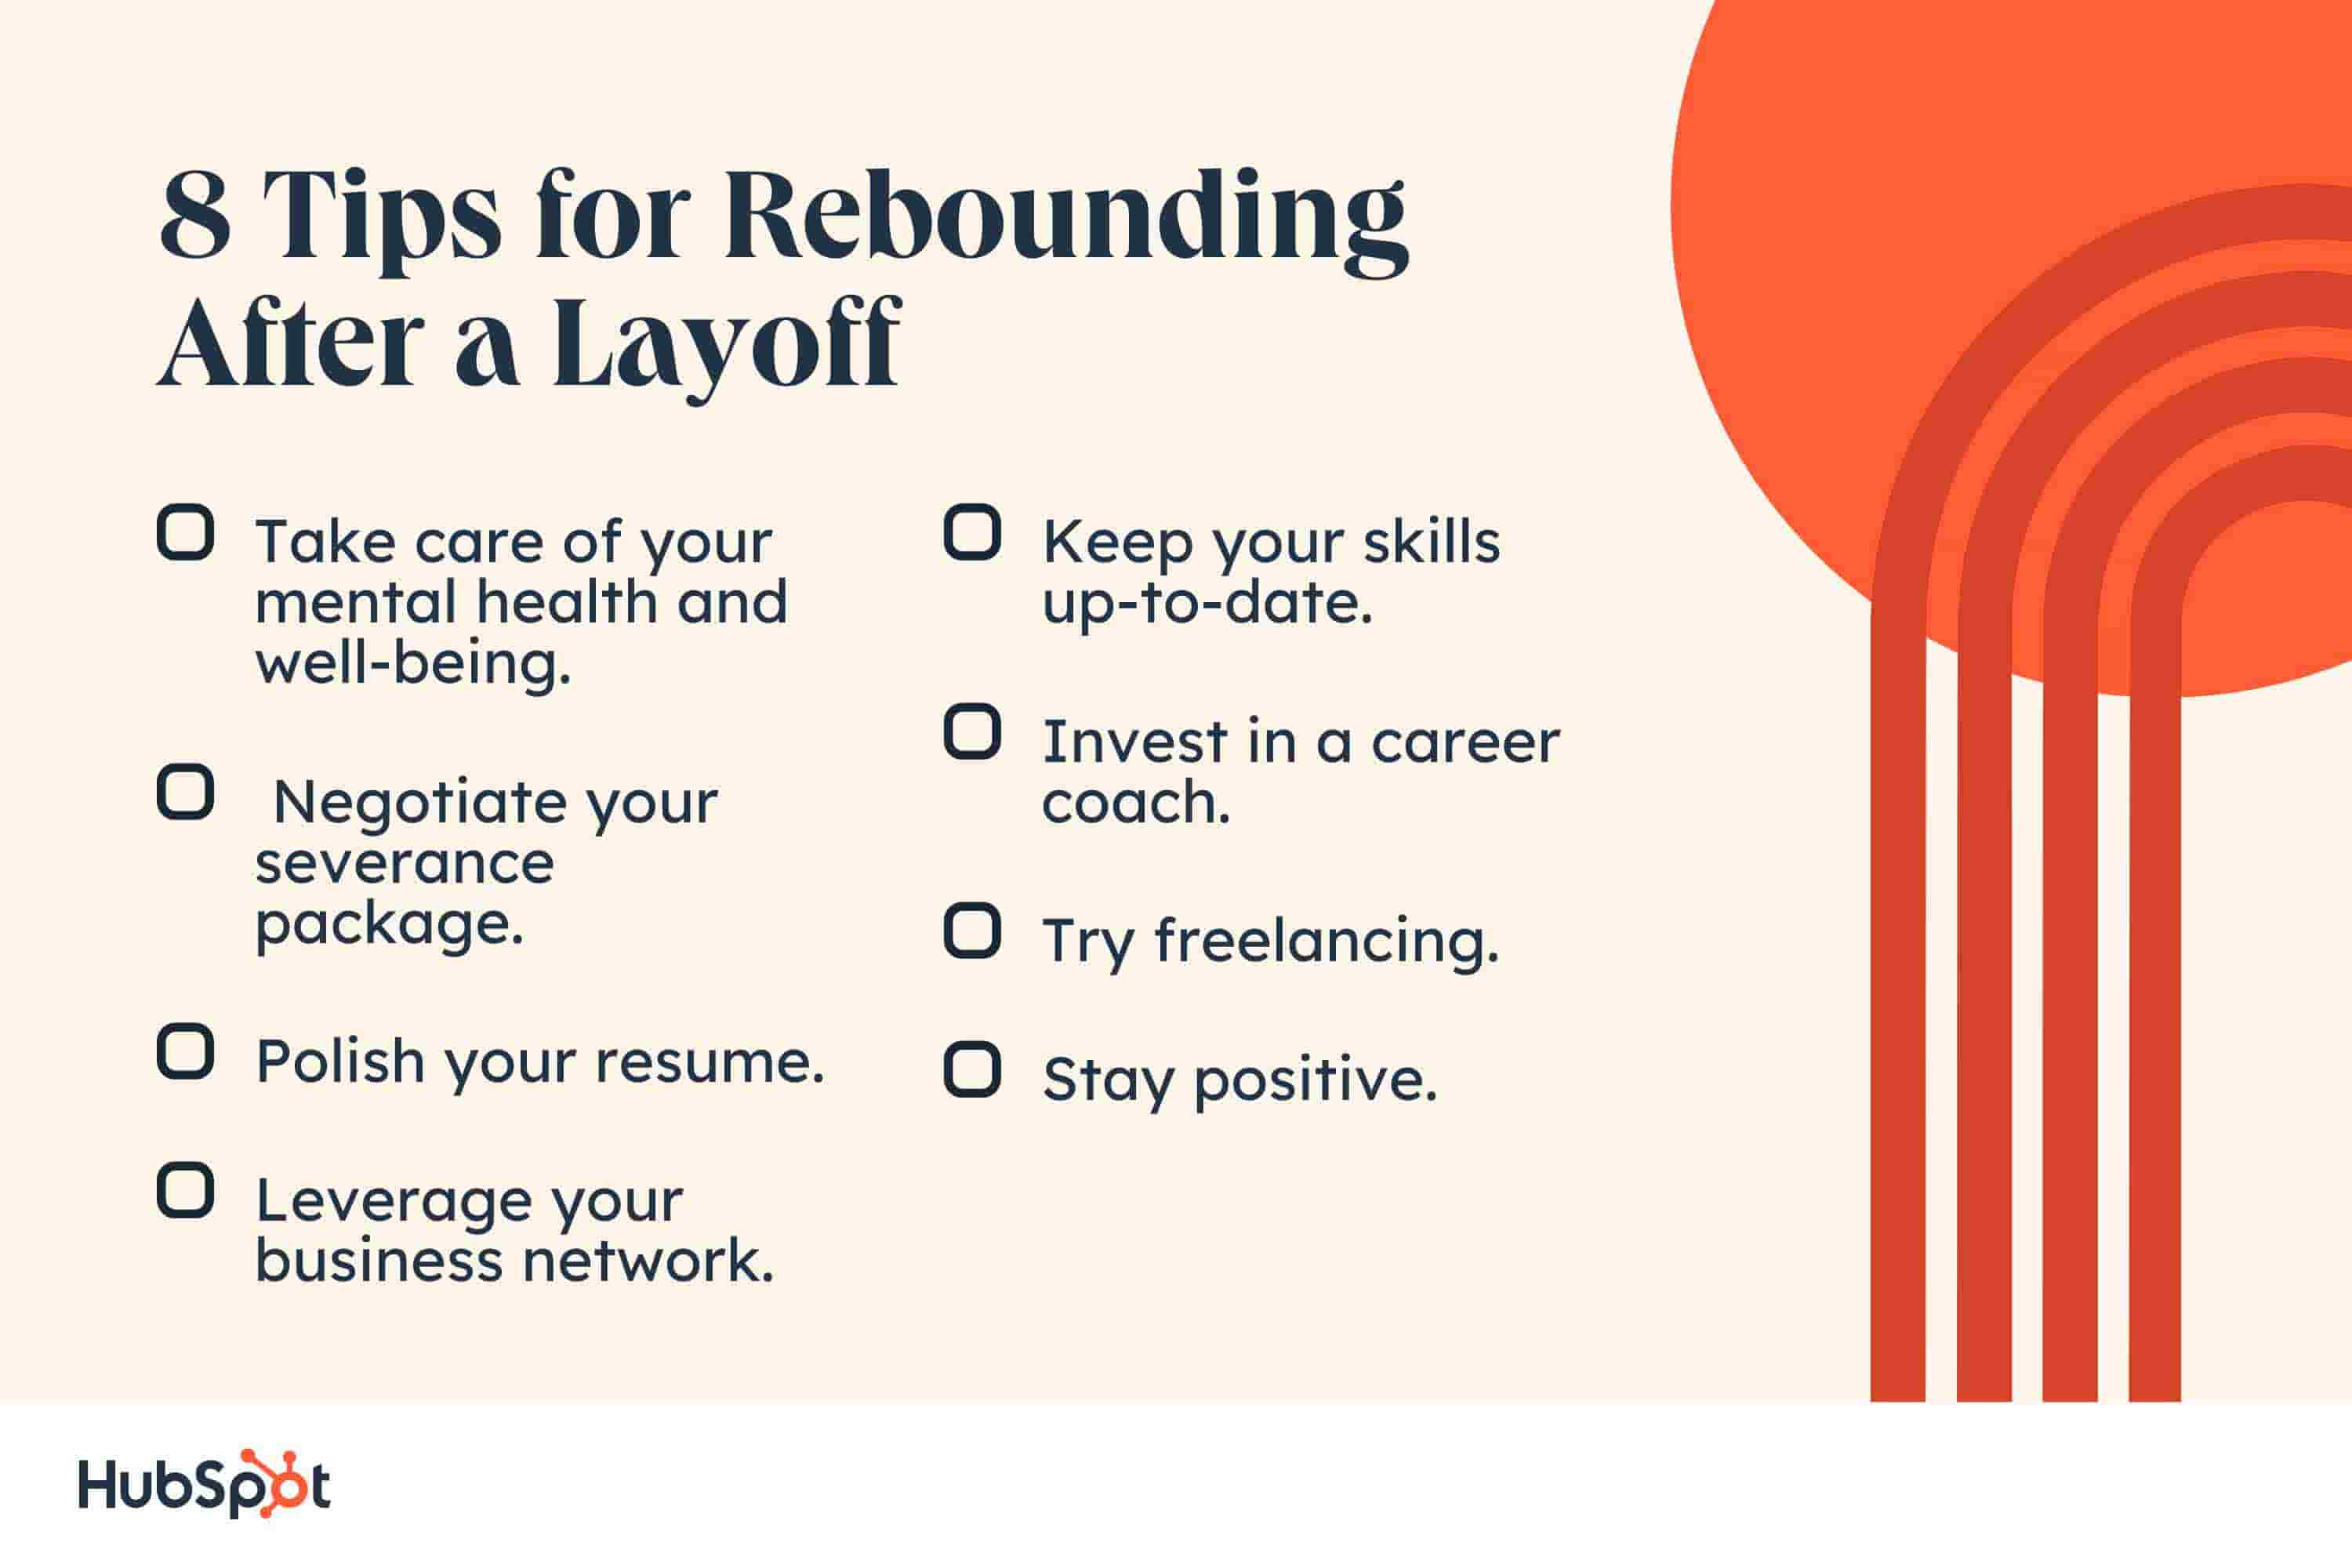 rebounding after a layoff. 8 Tips for Rebounding After a Layoff. Take care of your mental health and well-being. Negotiate your severance package. Polish your resume. Leverage your business network. Keep your skills up-to-date. Invest in a career coach. Try freelancing. Stay positive.